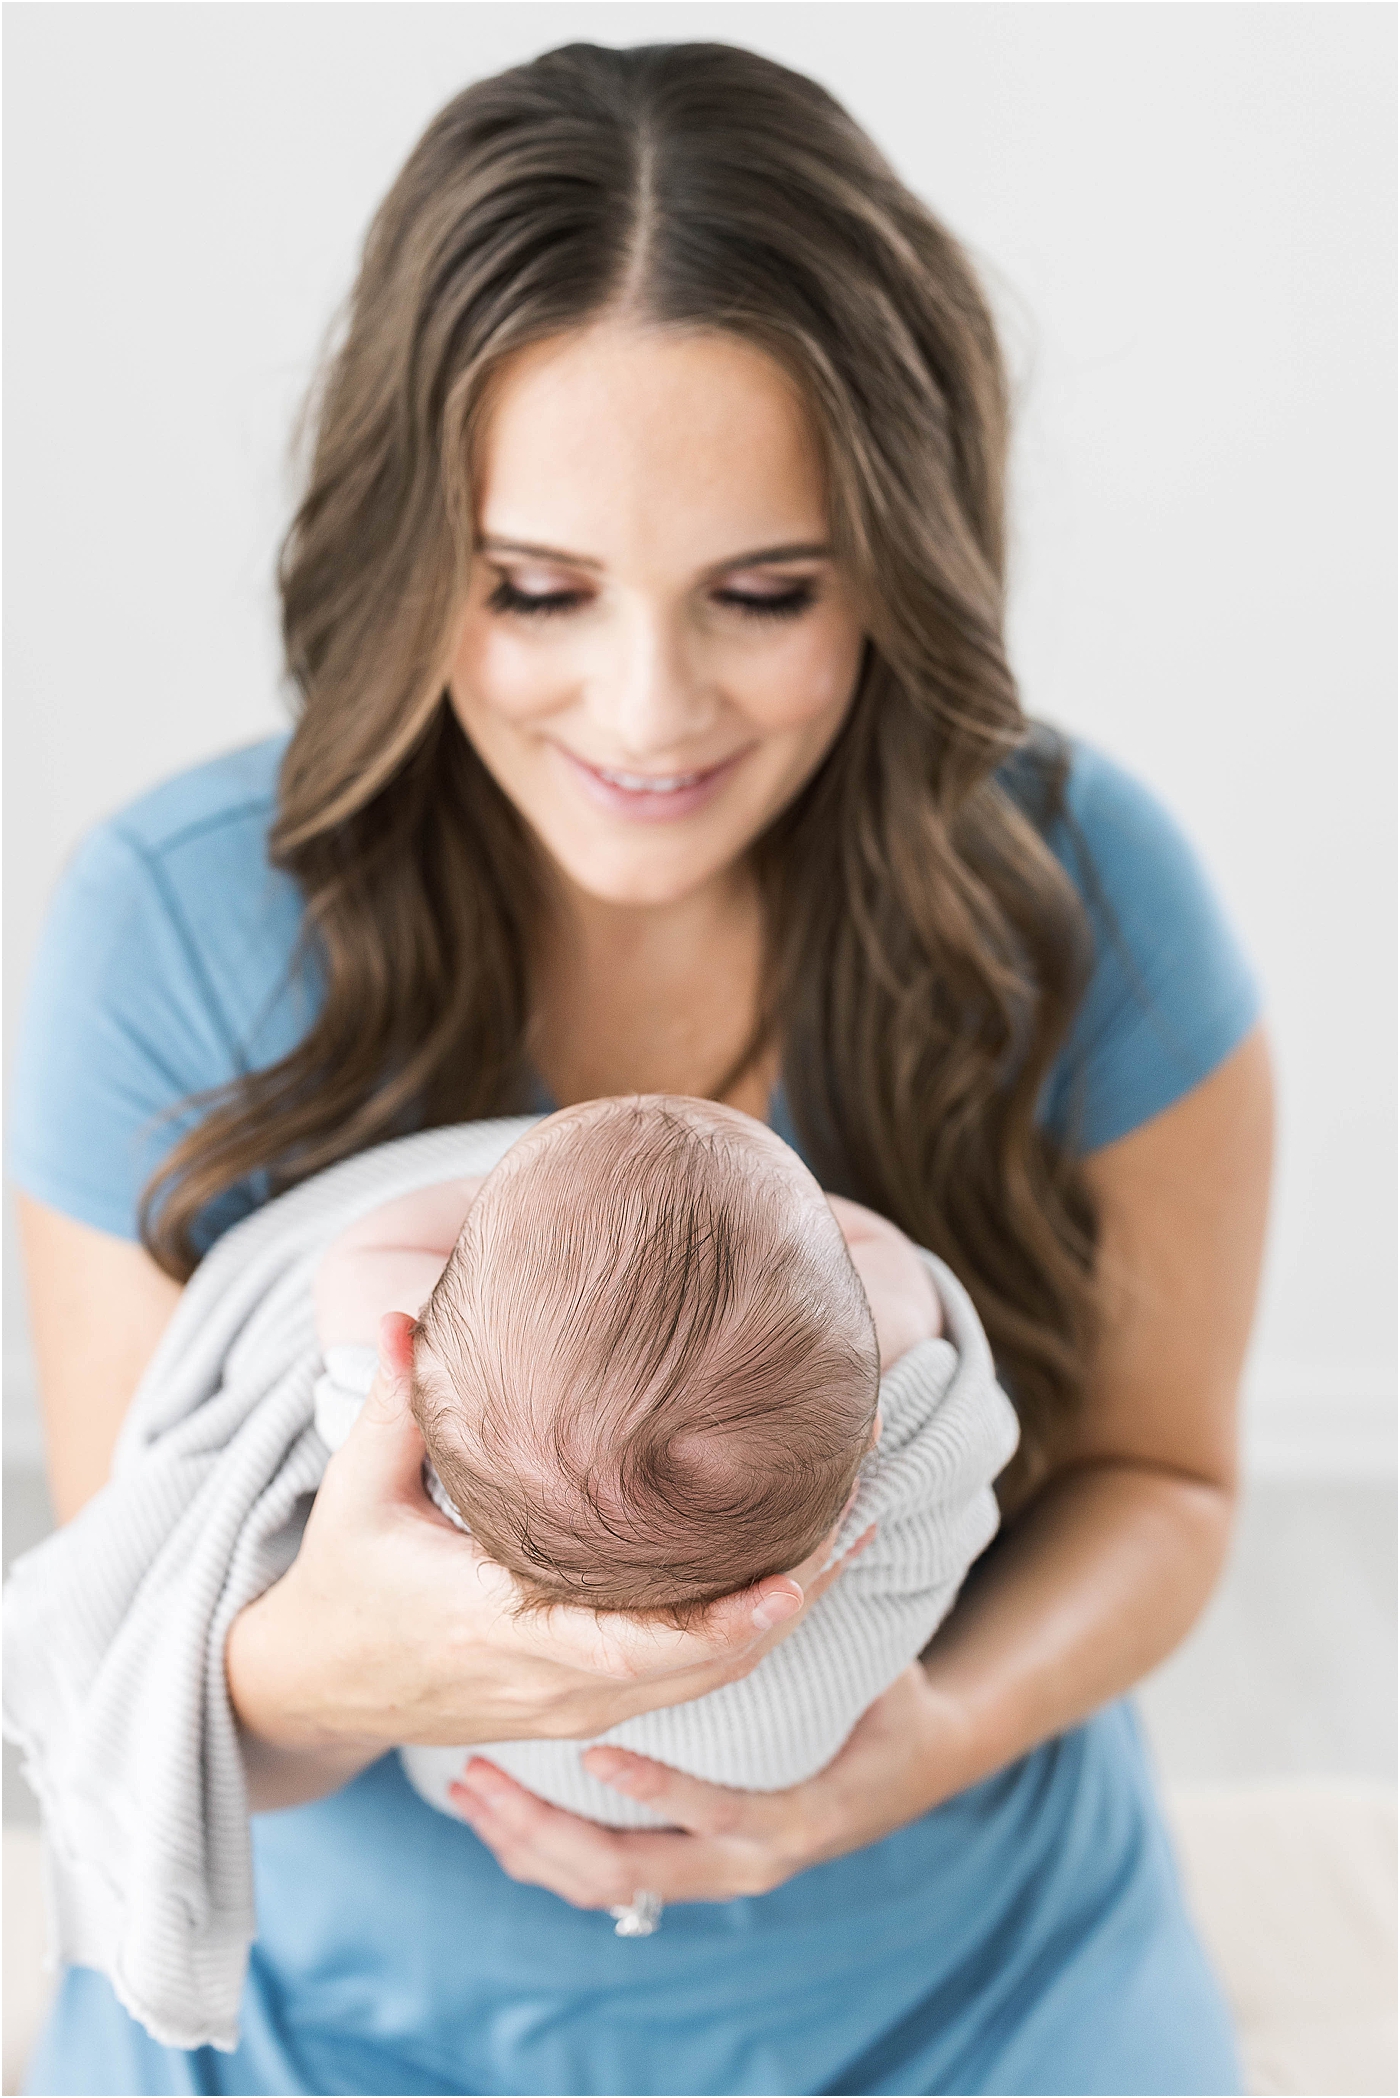 New mom holding baby out in front of her for newborn photos | Lindsay Konopa Photography